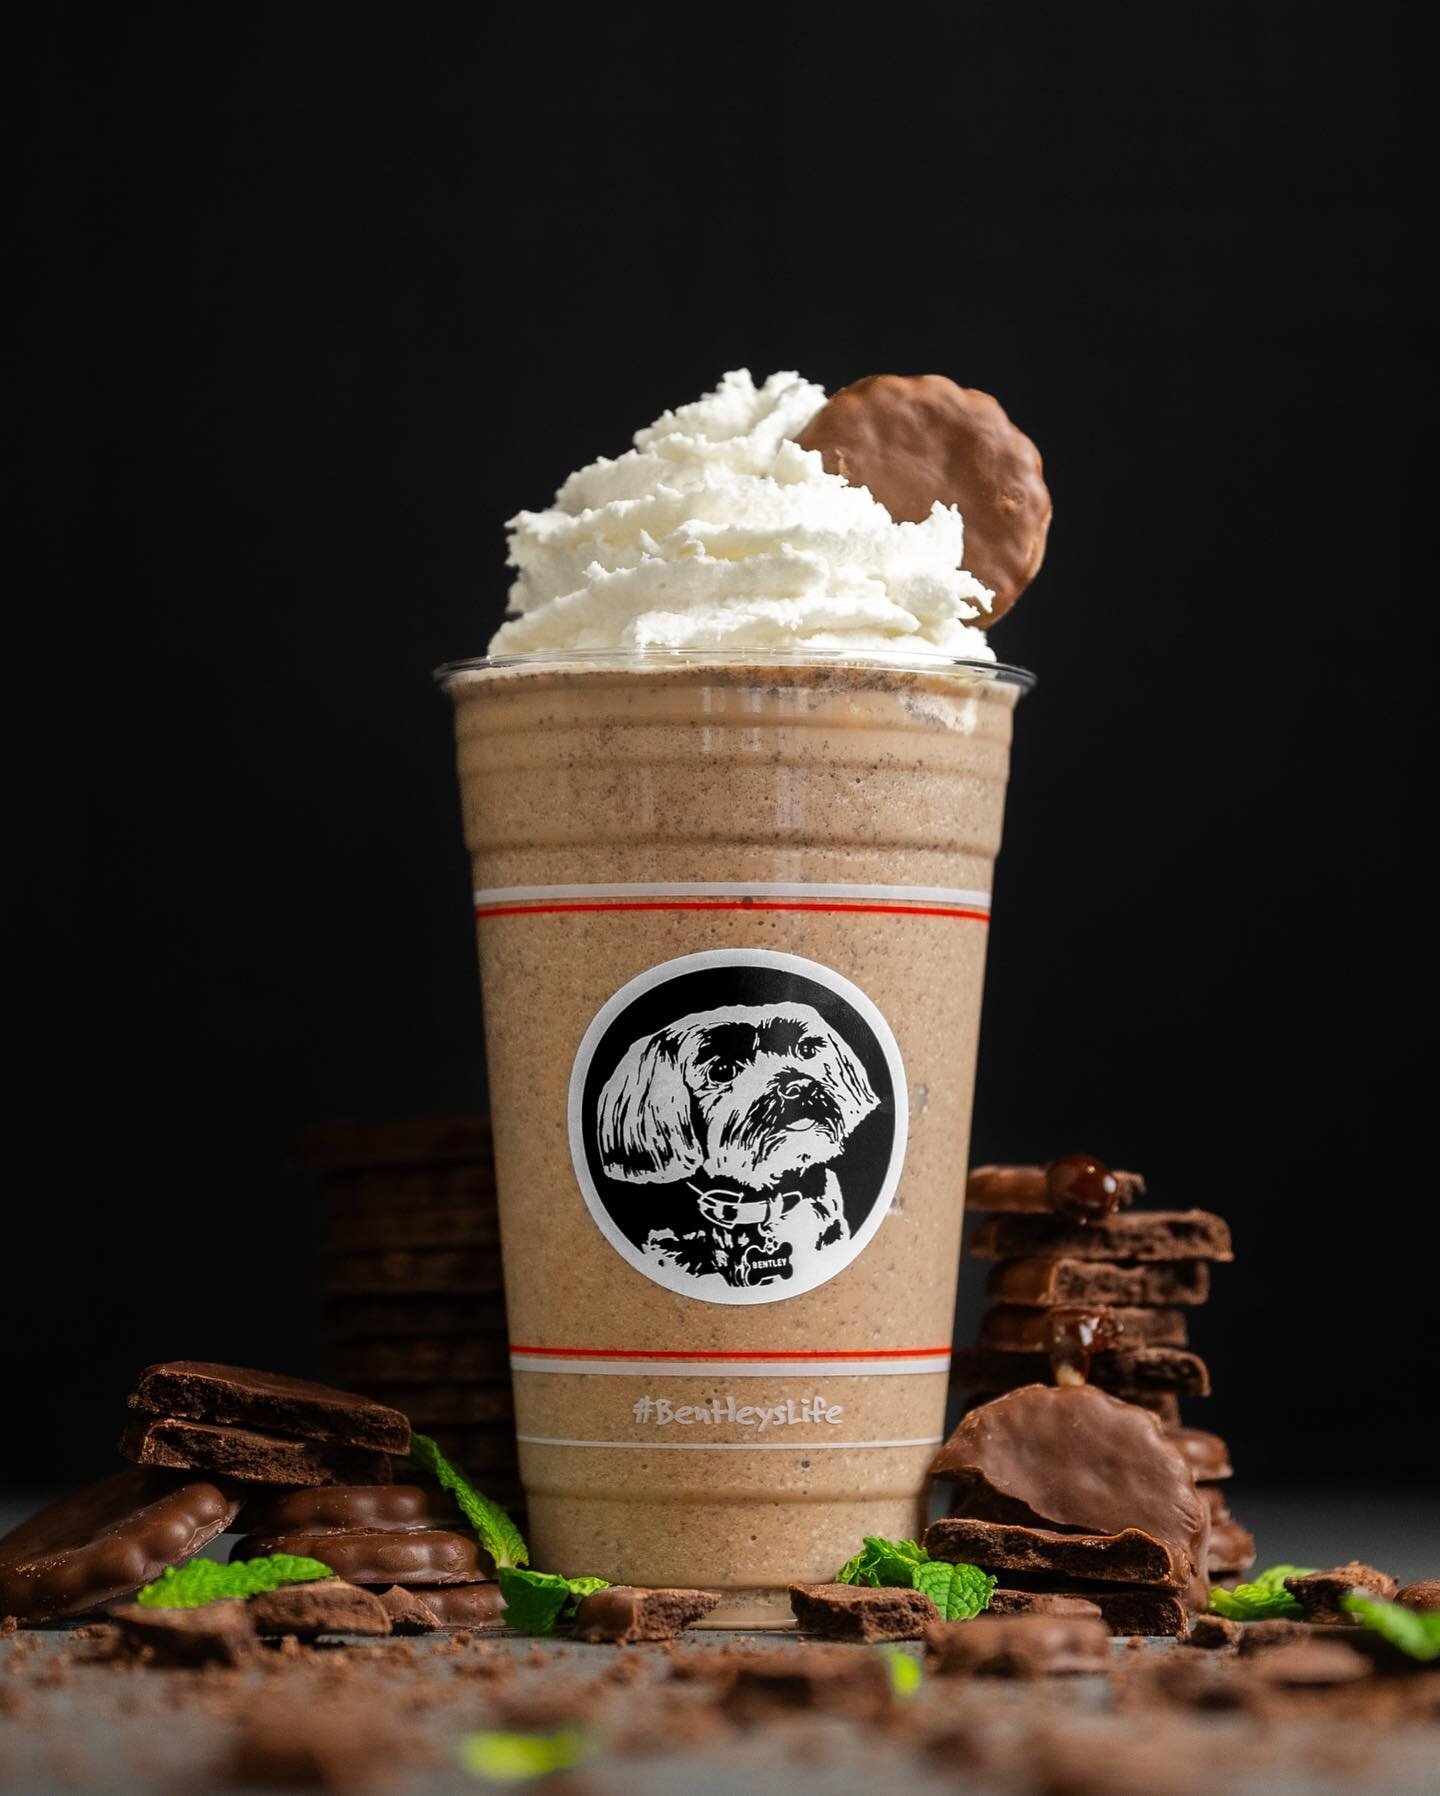 MINT COOKIE MOCHA 🍫🍃
Back for a limited time!!! ✨

Mint fudge cookies blended with our house-made peppermint syrup, our Brazilian espresso, and finally more of our house-made chocolate! 🤤

Crunchy, creamy, chocolate-y. Try it hot, blended or as a 